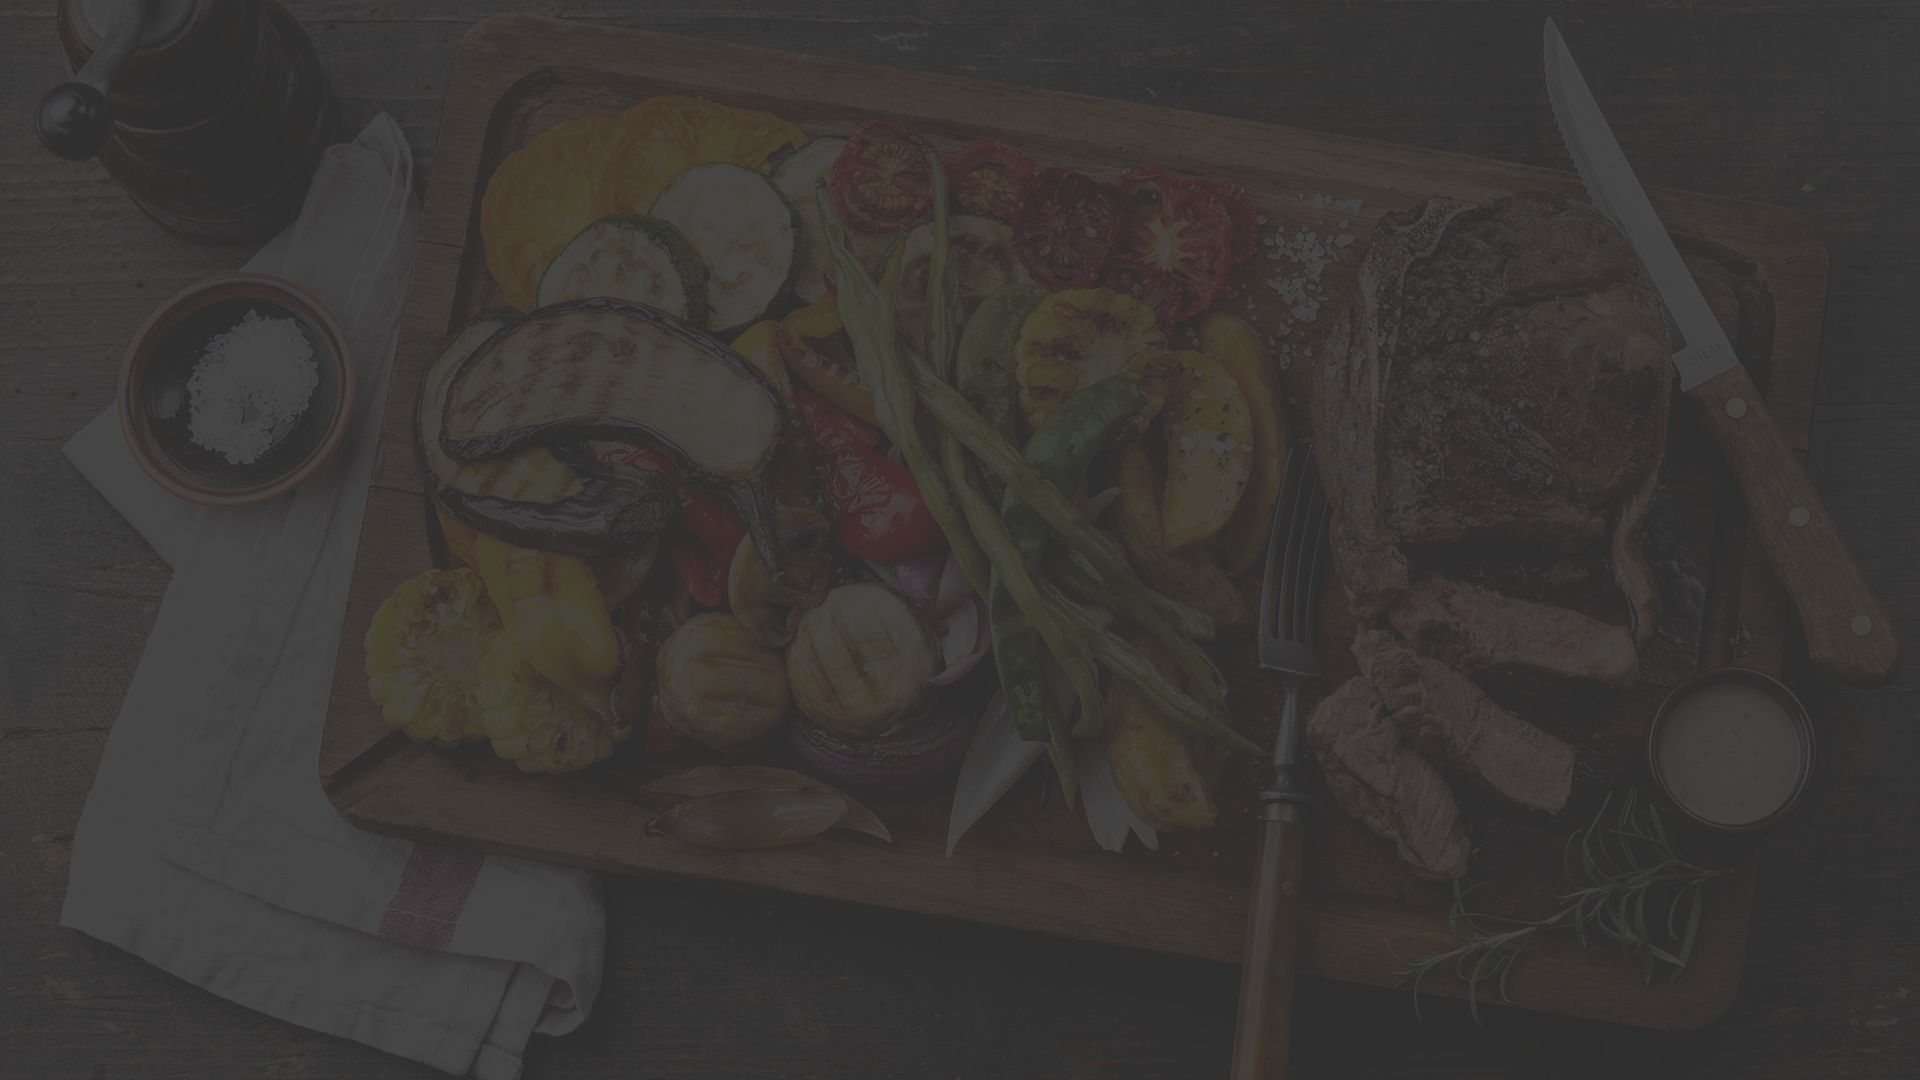 A cutting board filled with paleo-friendly foods, including plenty of vegetables and protein.